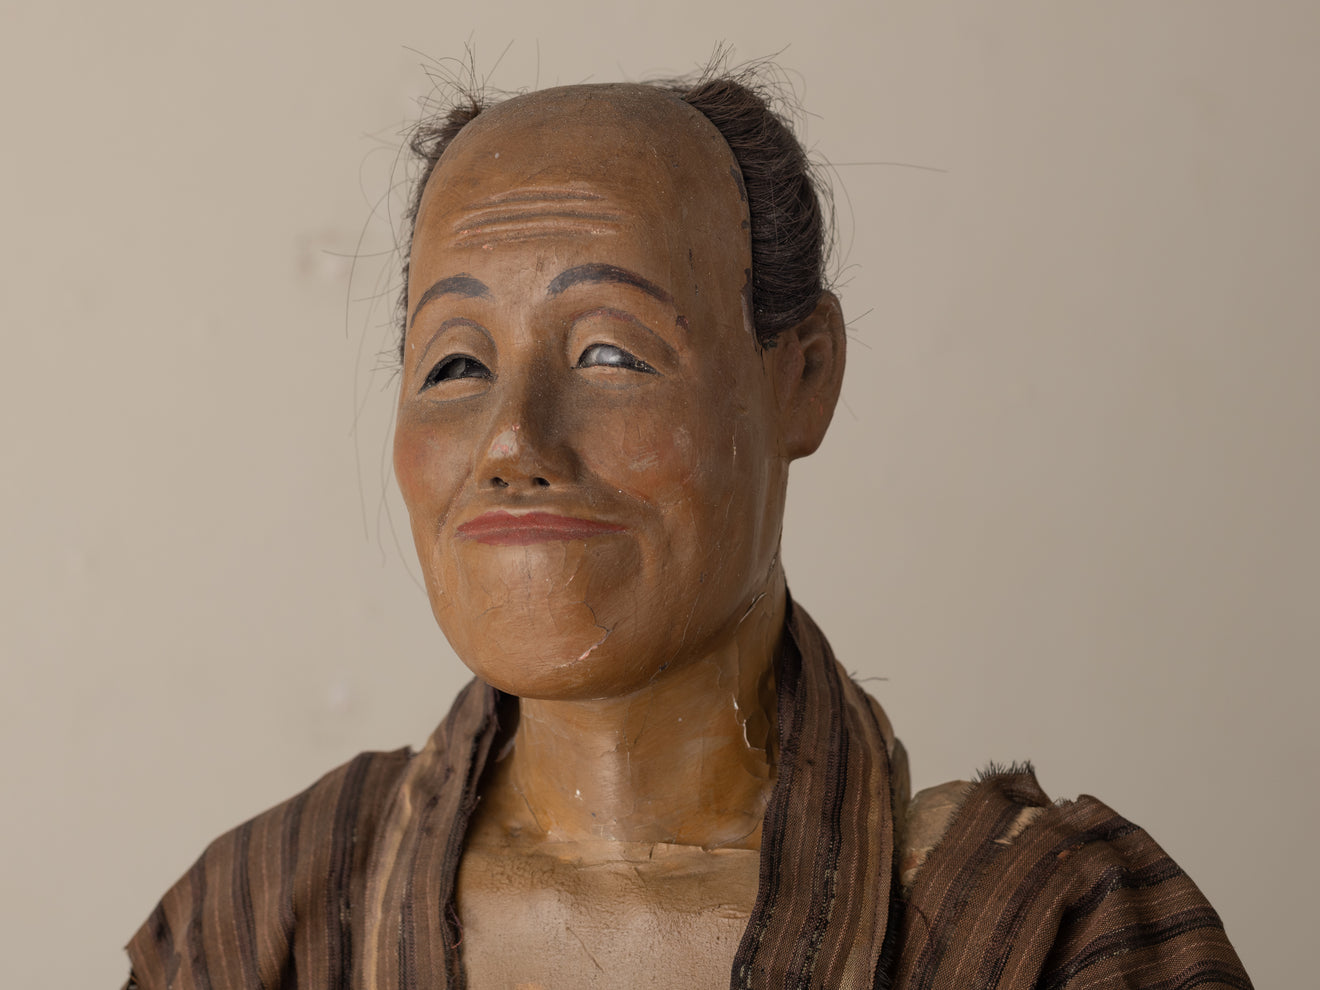 CARVED FIGURE OF JAPANESE MAN WITH HUMAN HAIR